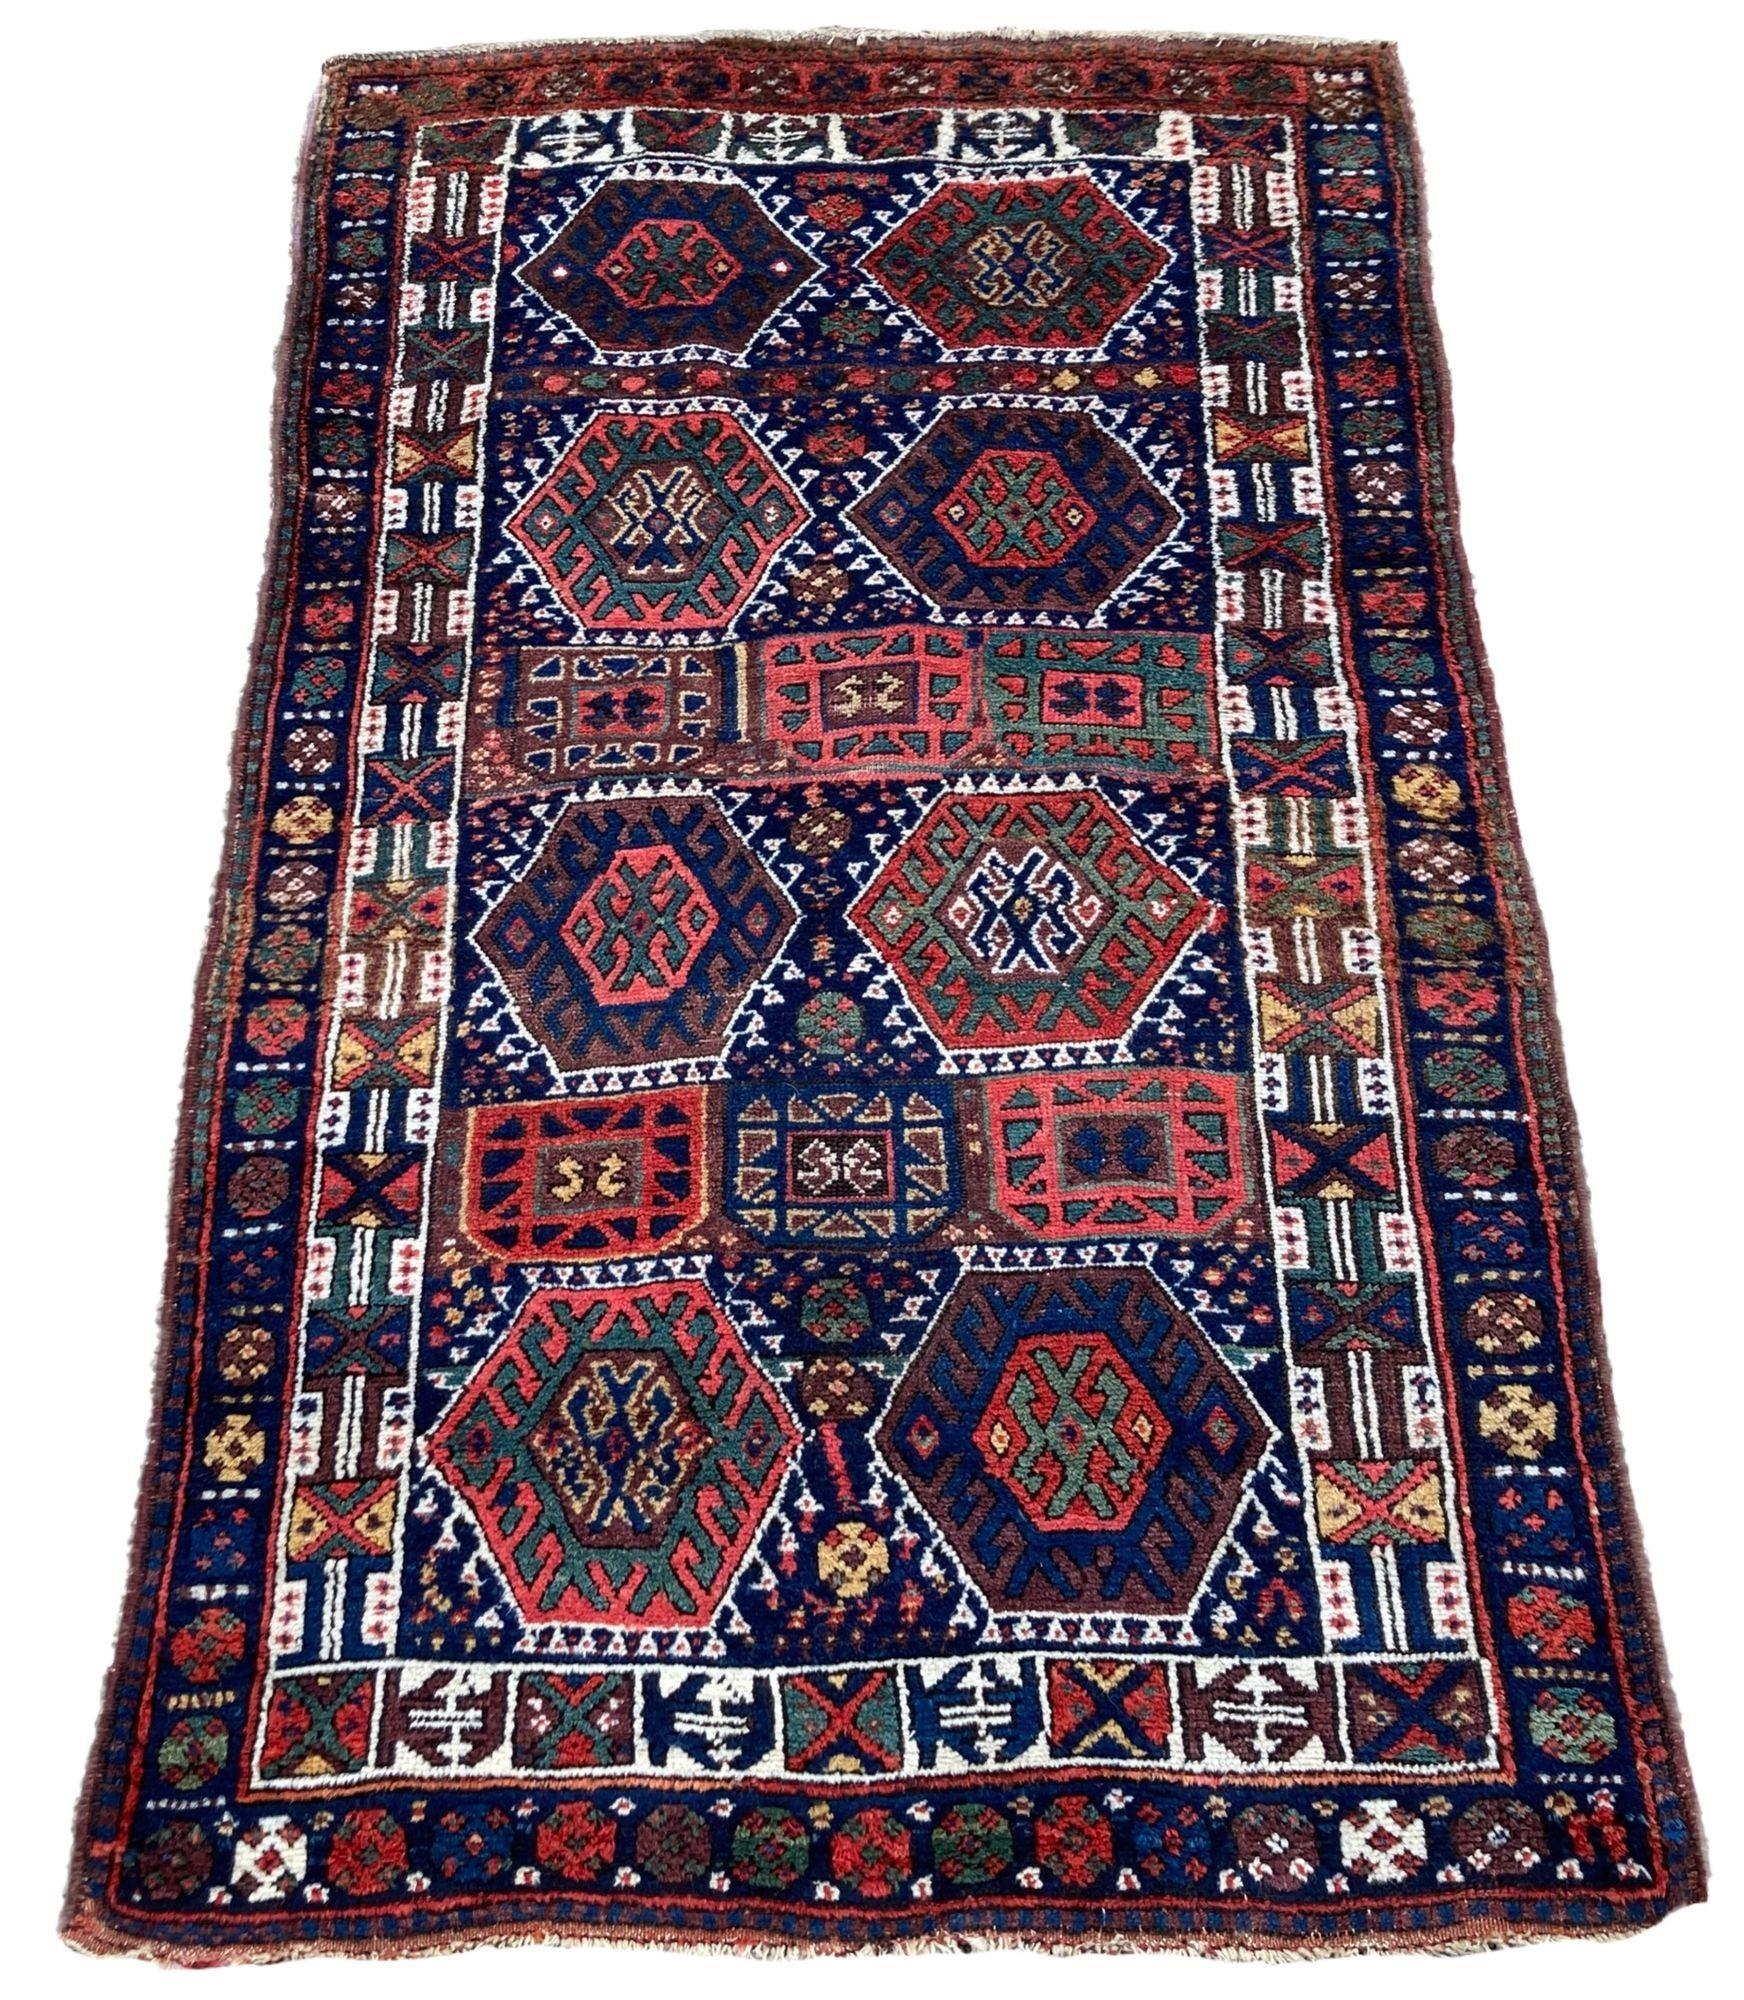 A wonderful antique Kurdish rug, handwoven circa 1900. The rug features an all over geometrical design on a deep indigo field and ivory border. Woven with soft velvety wool and beautiful secondary colours of greens, reds and golds. A great example